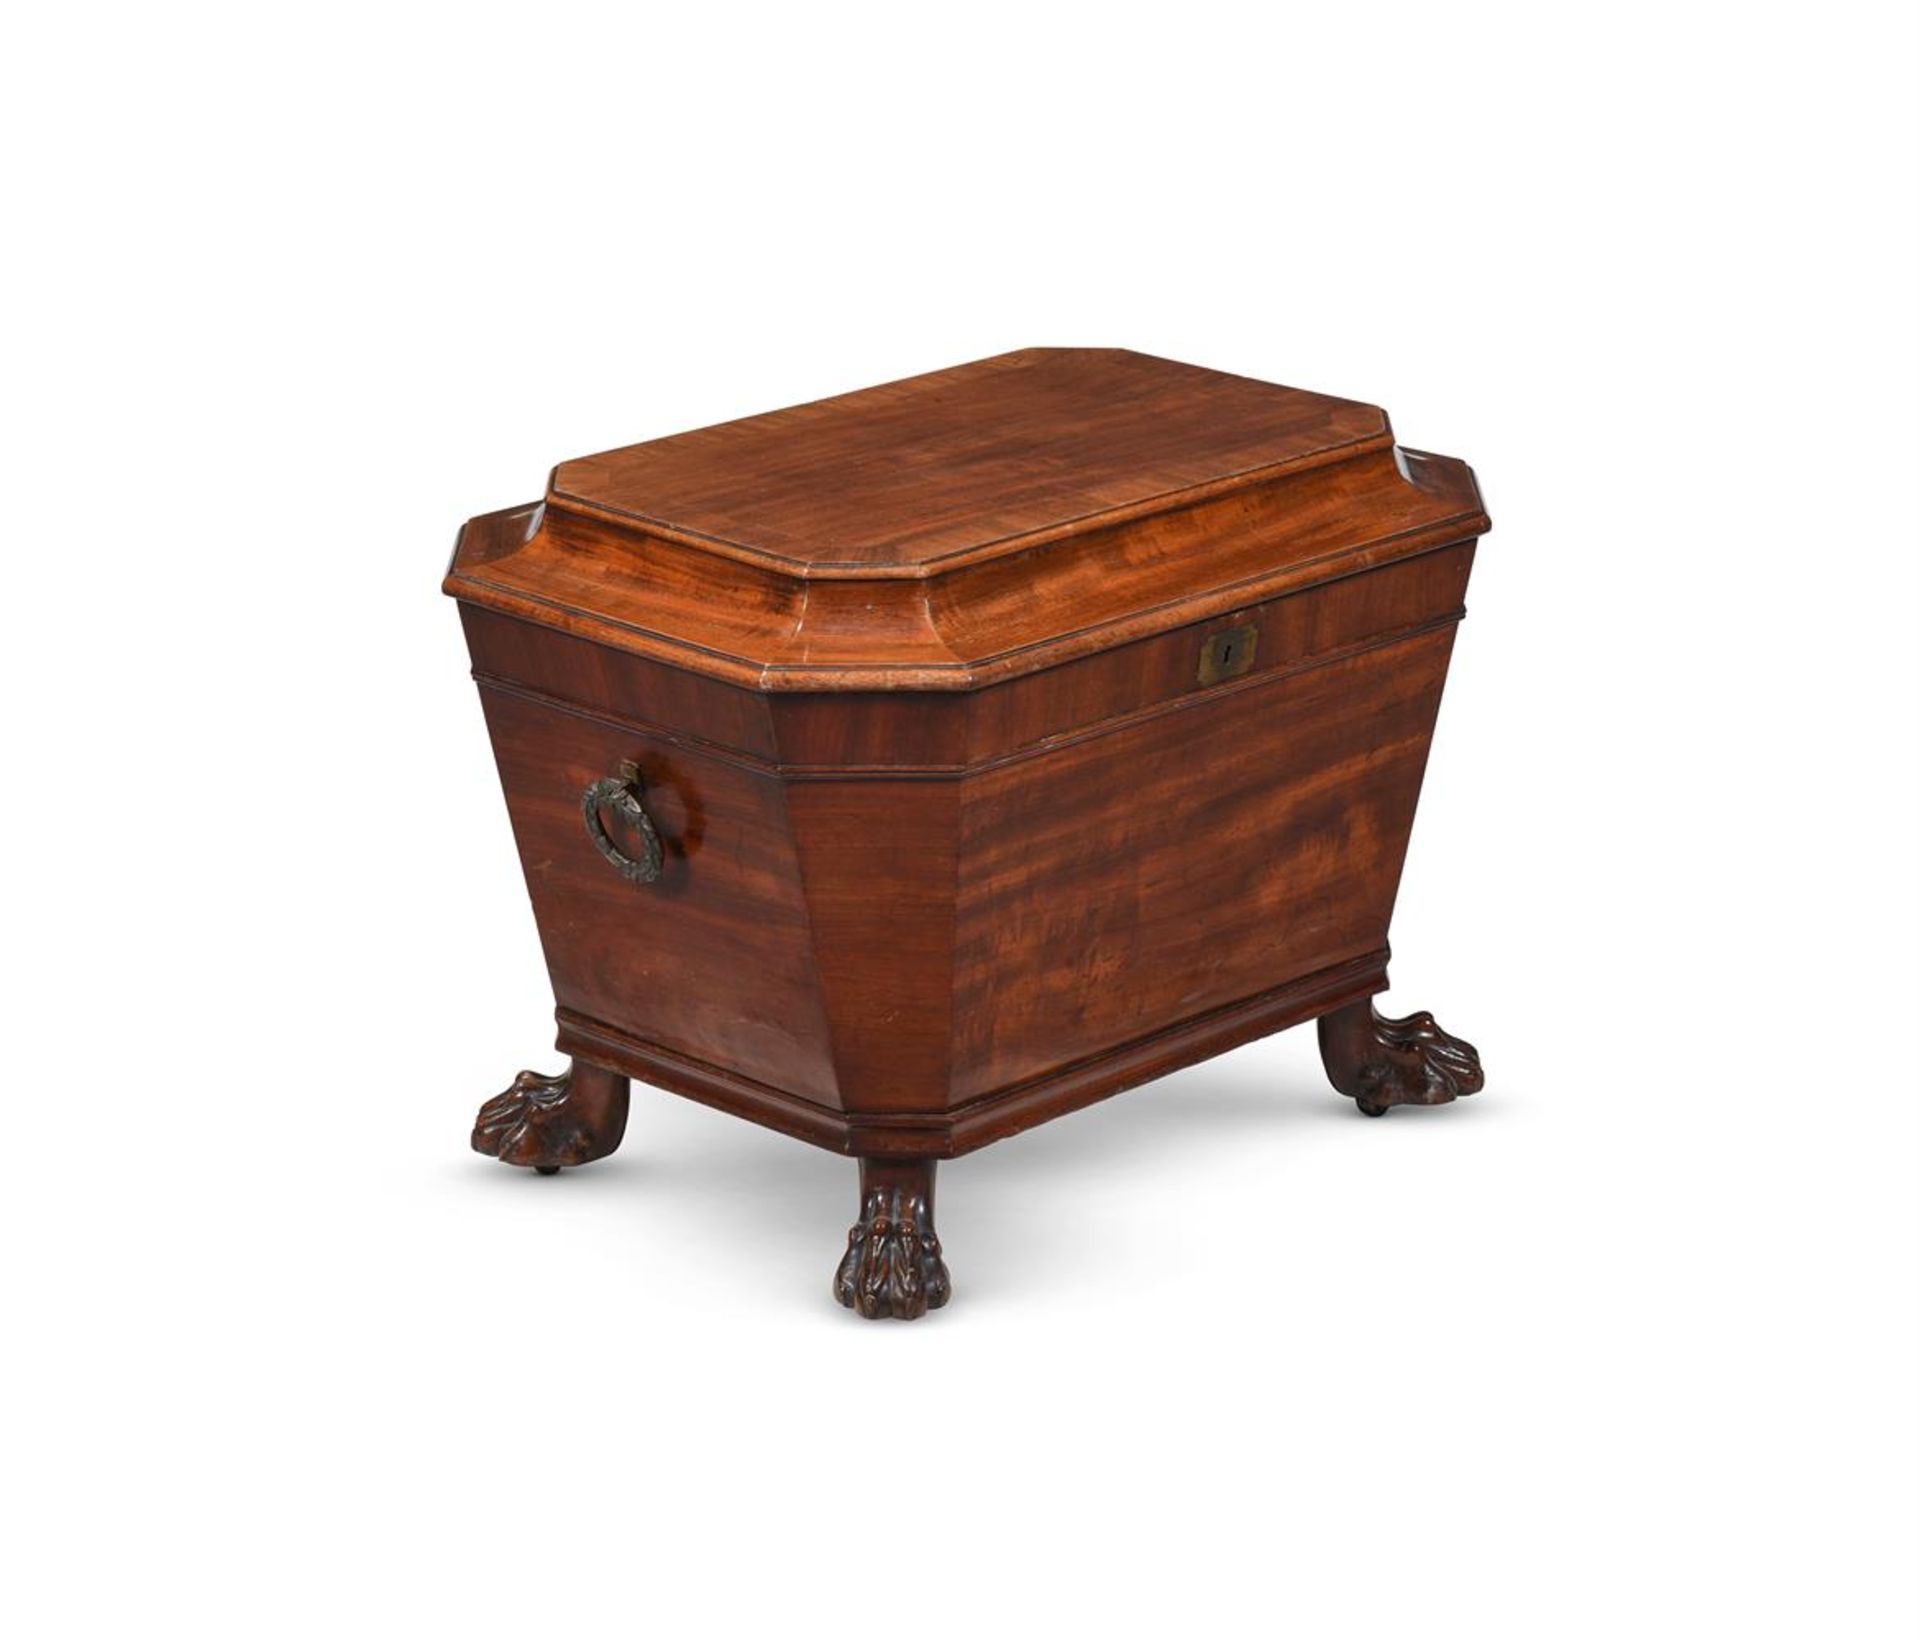 A REGENCY MAHOGANY AND CROSSBANDED SARCOPHAGUS WINE COOLER, CIRCA 1815